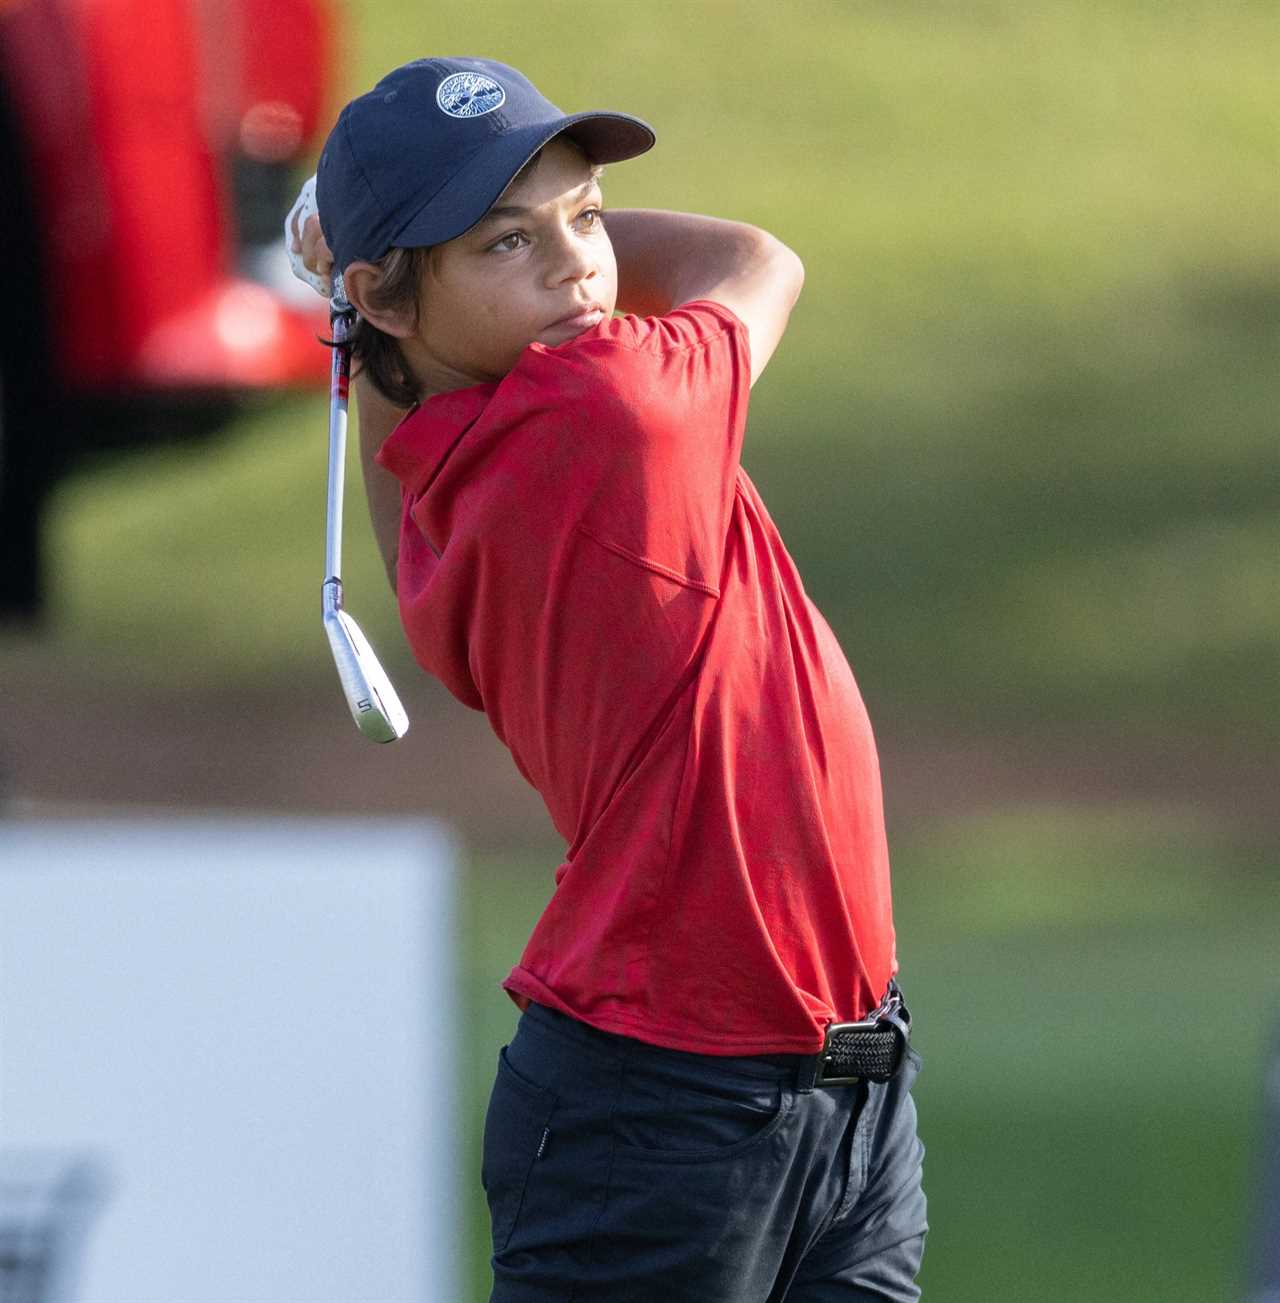 Charlie Woods, just 12, shares the same iconic swing and oncourse